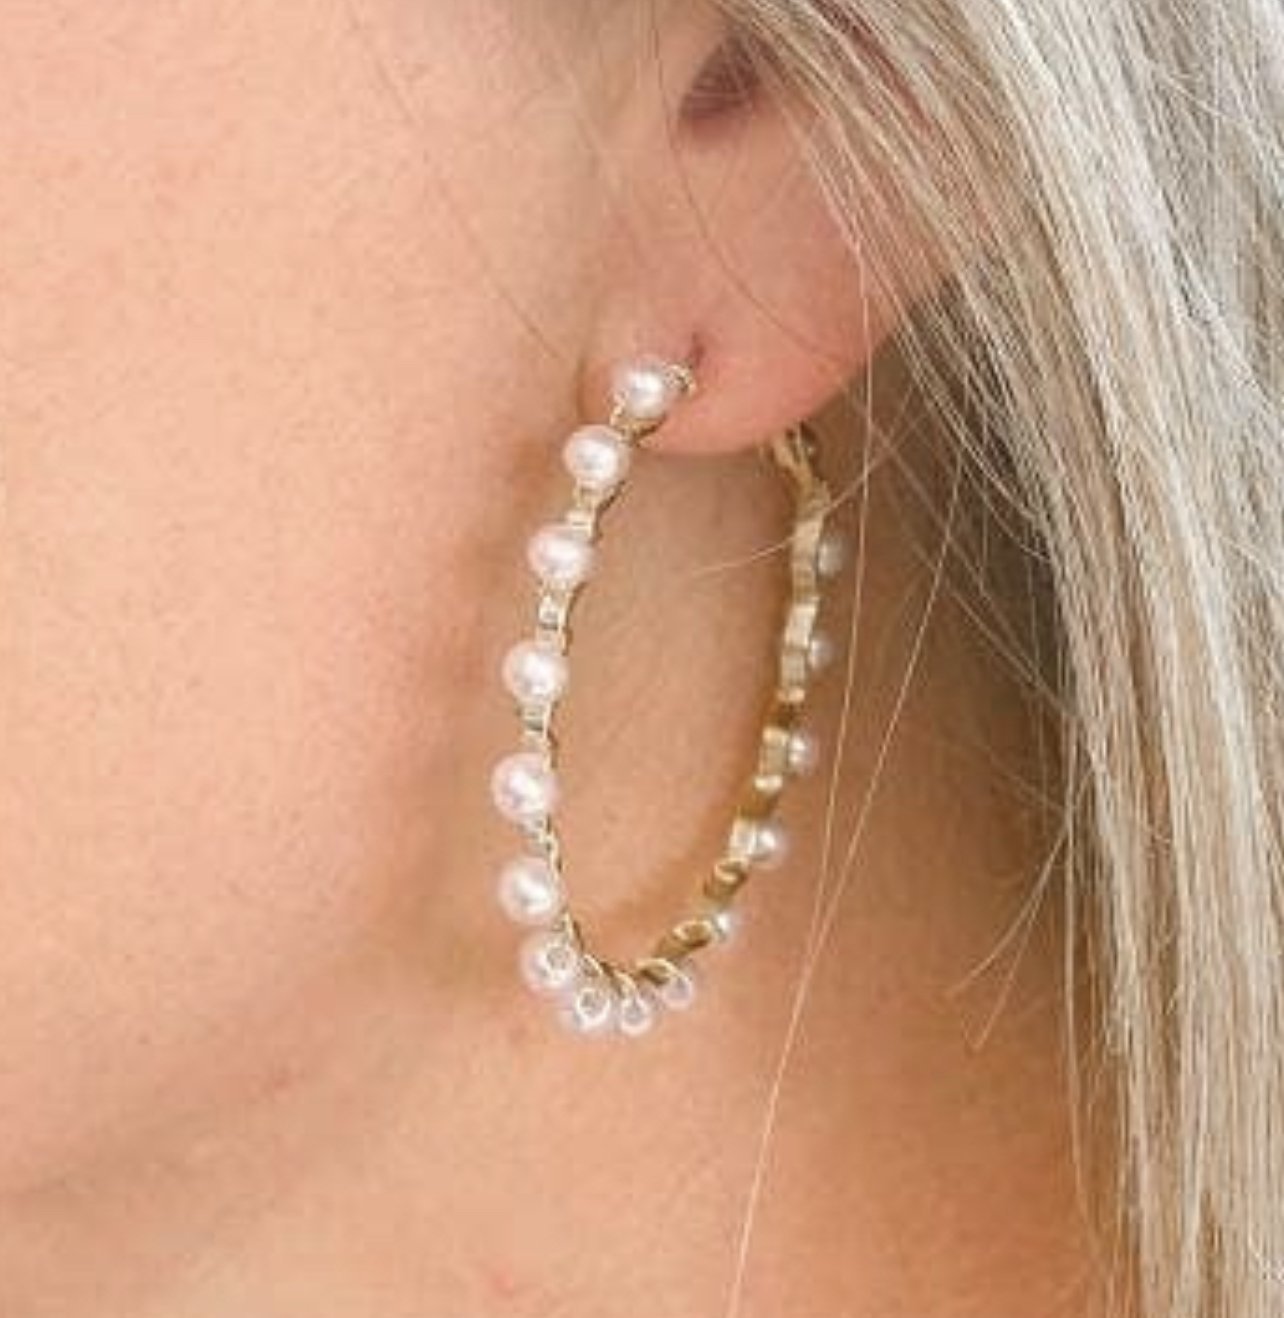 Gold and Pearl Hoops - Luca Hill BoutiqueEarrings